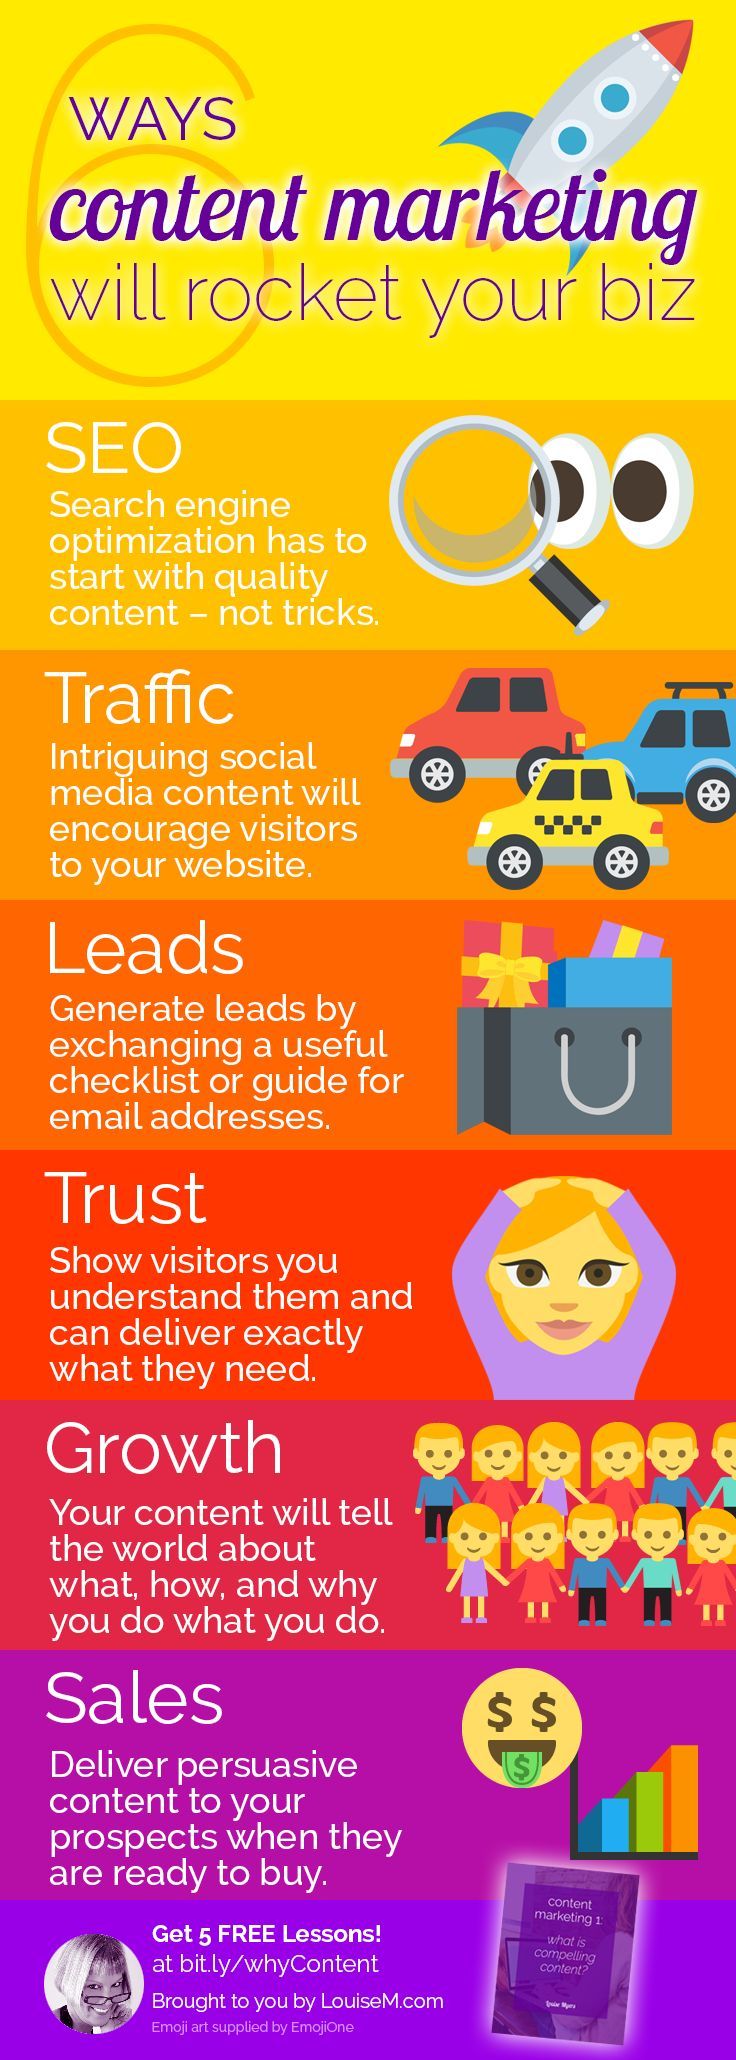 1531213600_481_Marketing-Infographic-Small-business-marketing-tips-Are-you-hearing-content-marketing-everywhere-an Marketing Infographic : Small business marketing tips: Are you hearing "content marketing" everywhere an...